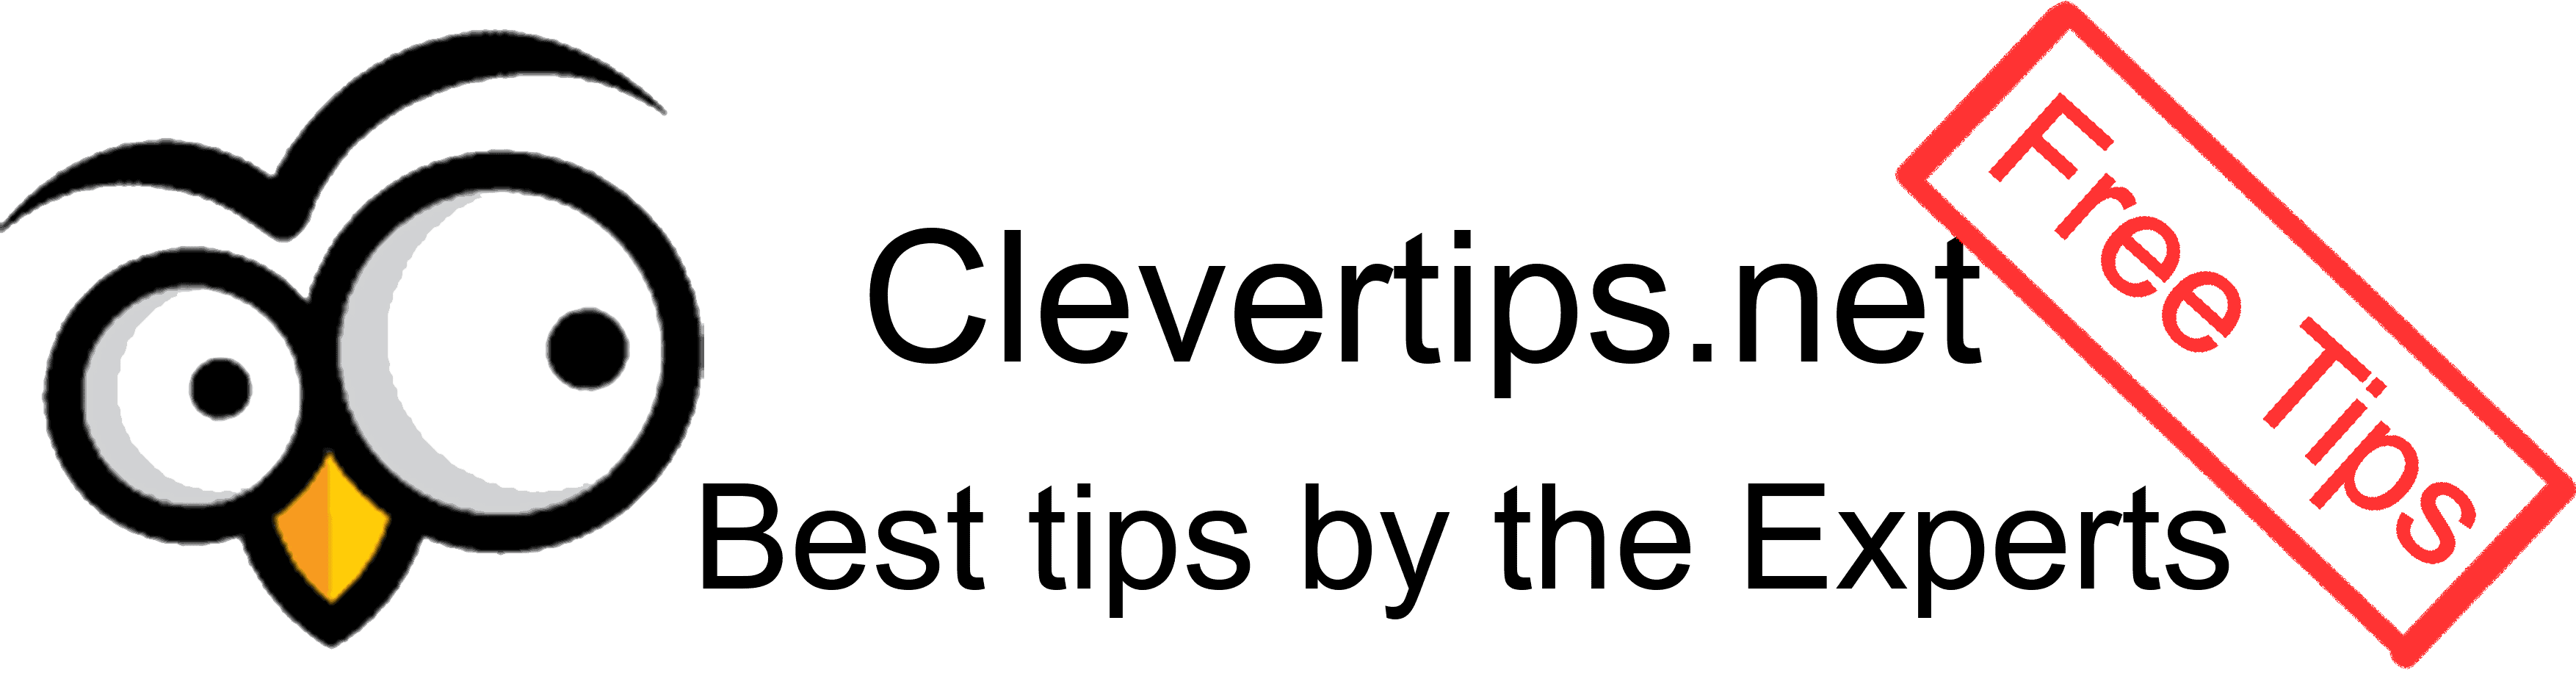 Free tips by the experts